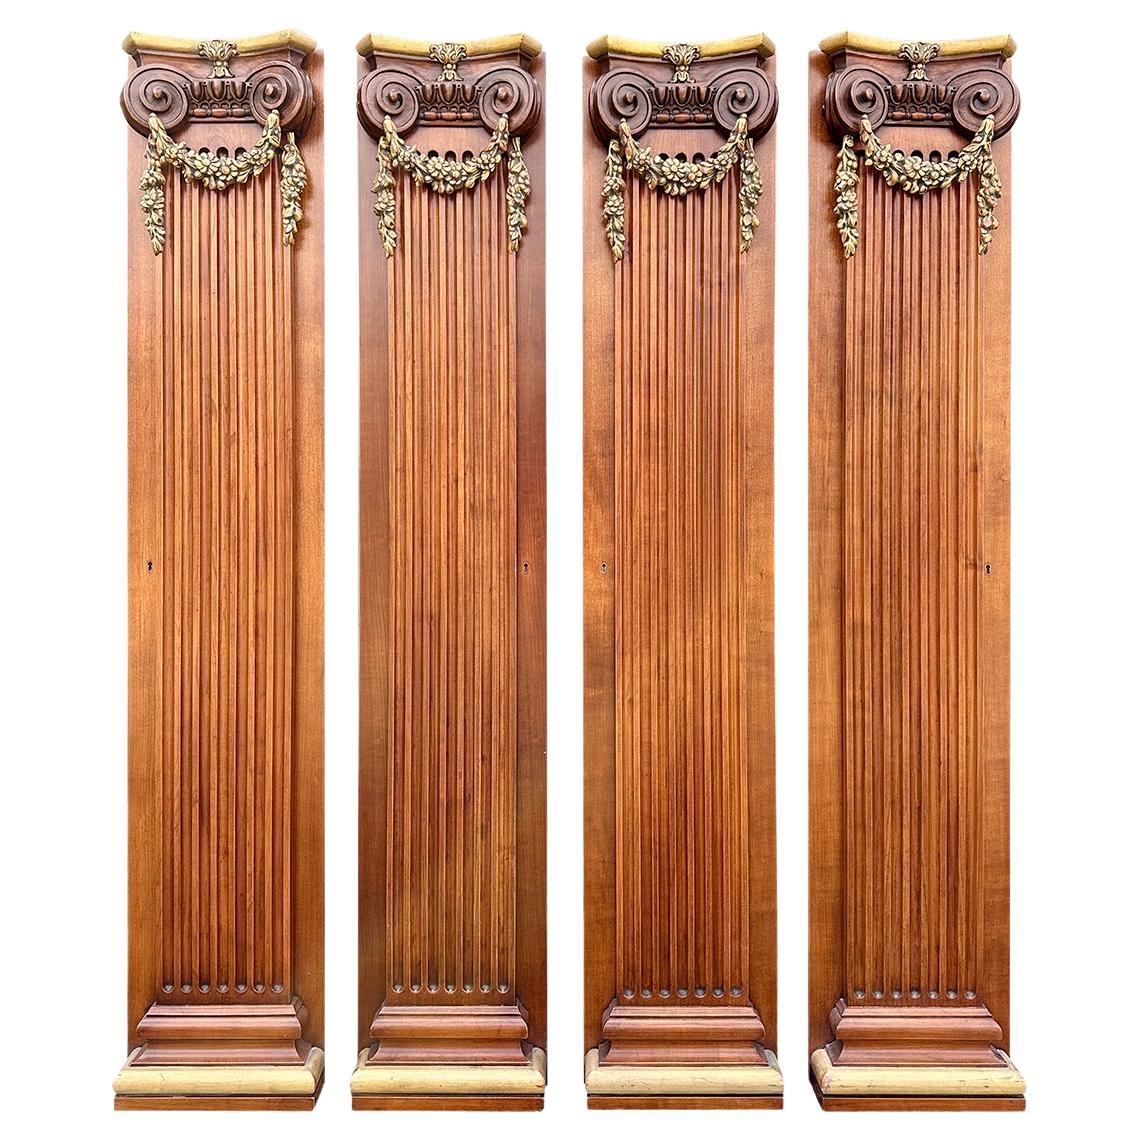 A Set Of 4 Walnut Italian Pilaster Columns With Gilt Carved Capitals  For Sale